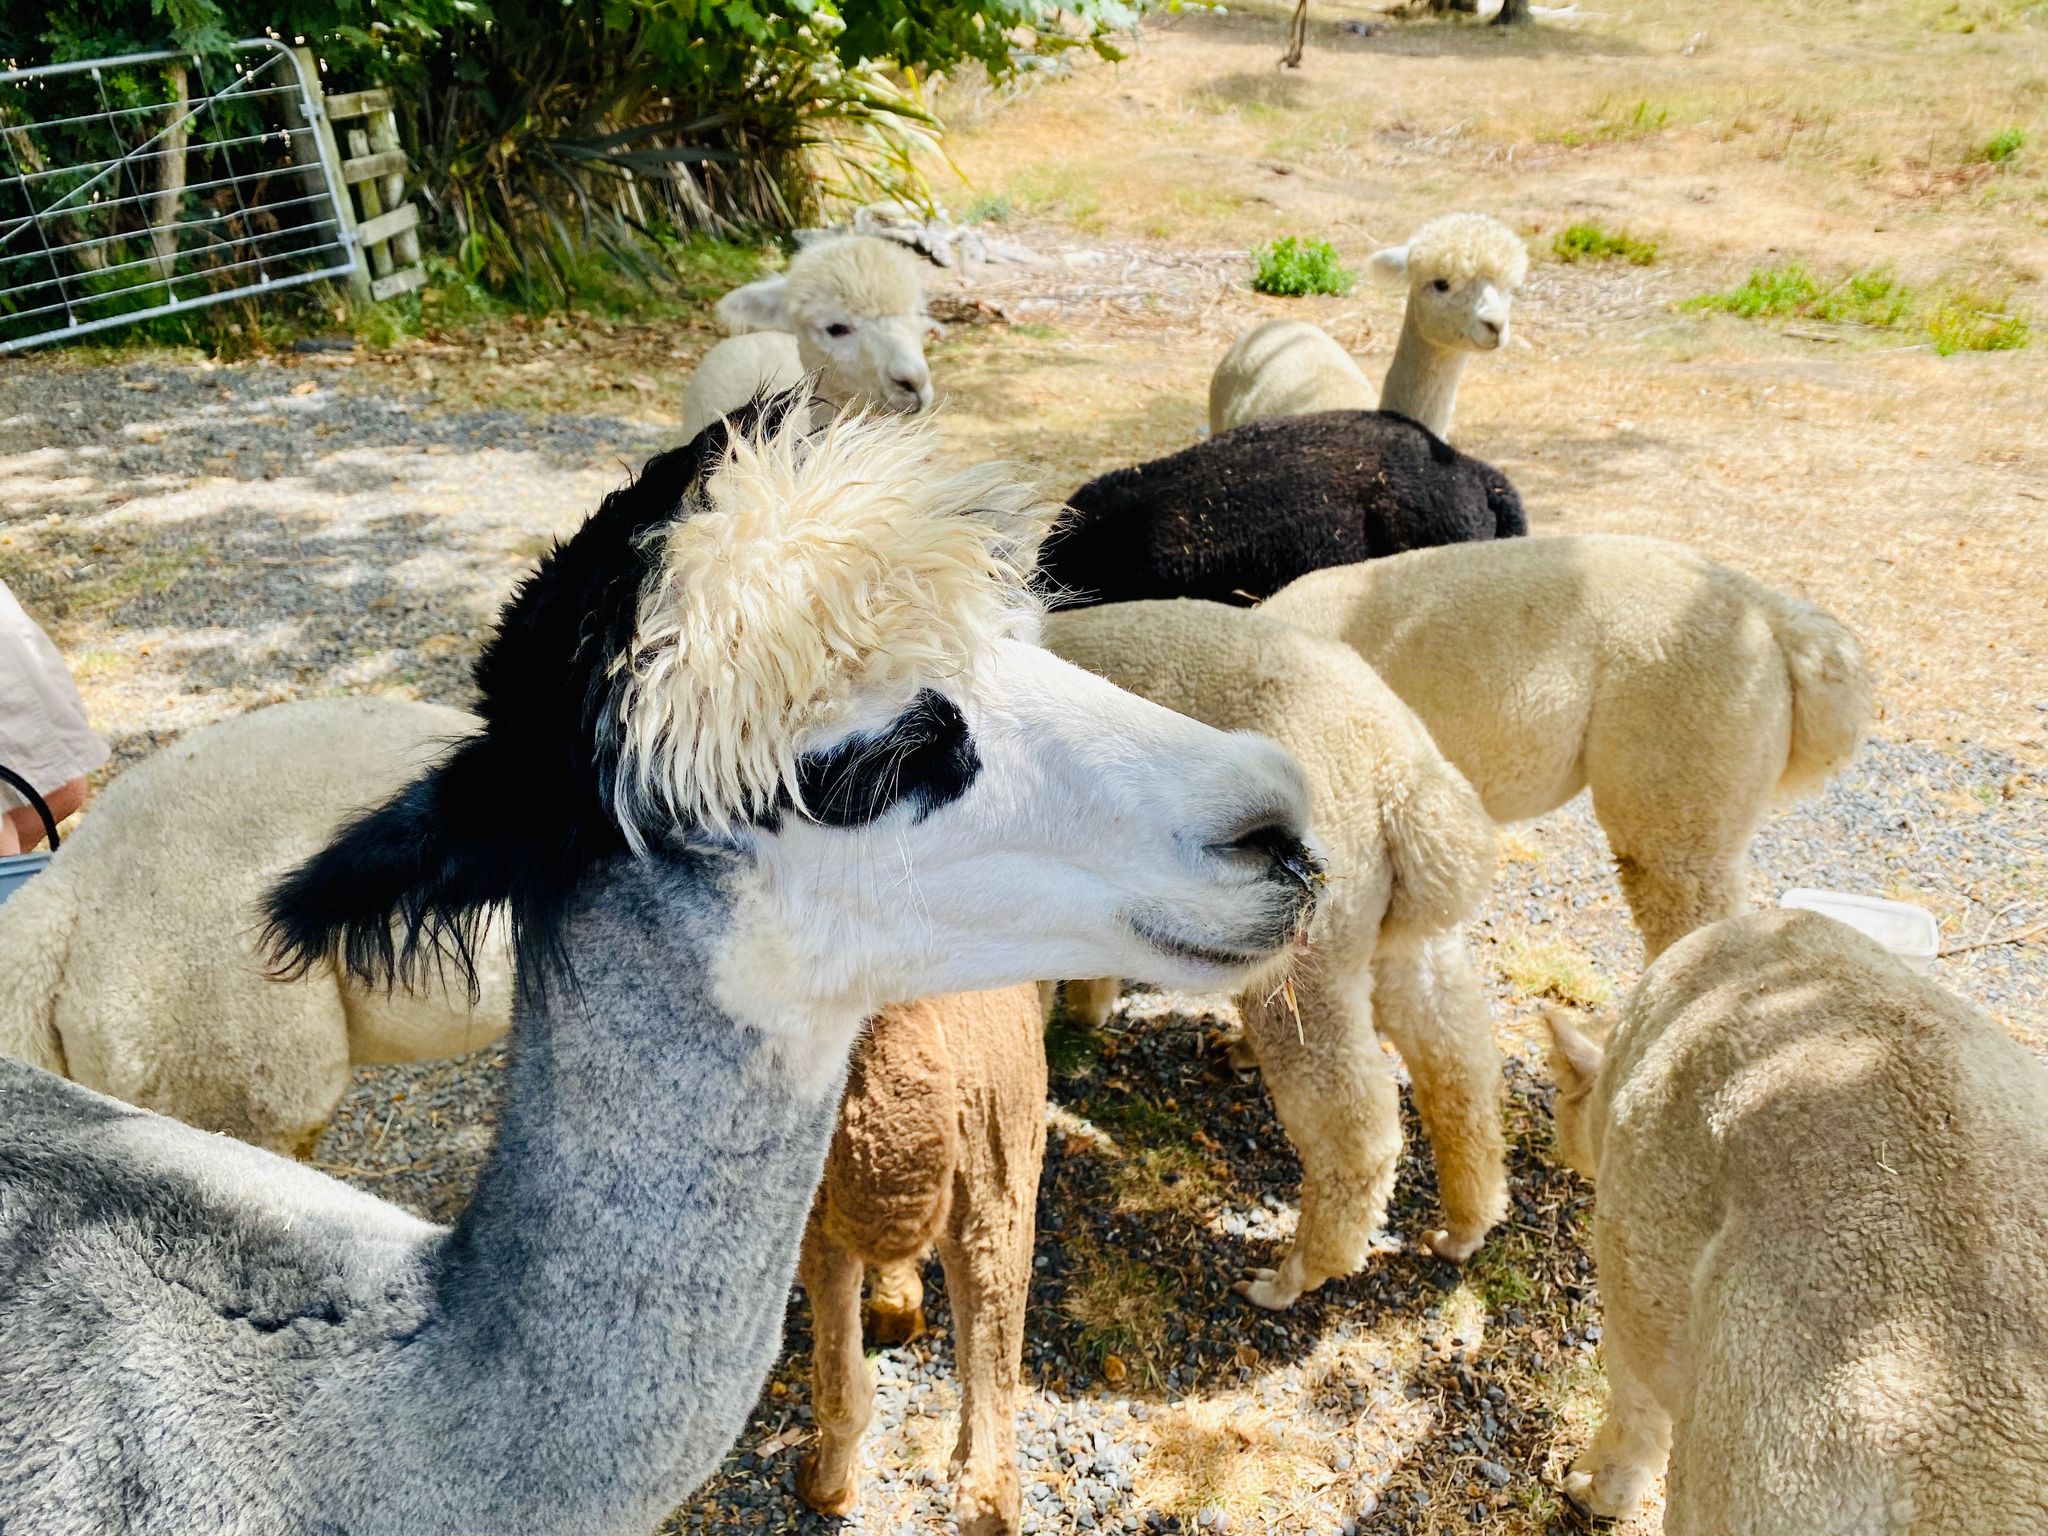 A photo of several alpacas, and one in the foreground with a black and white face and hair.